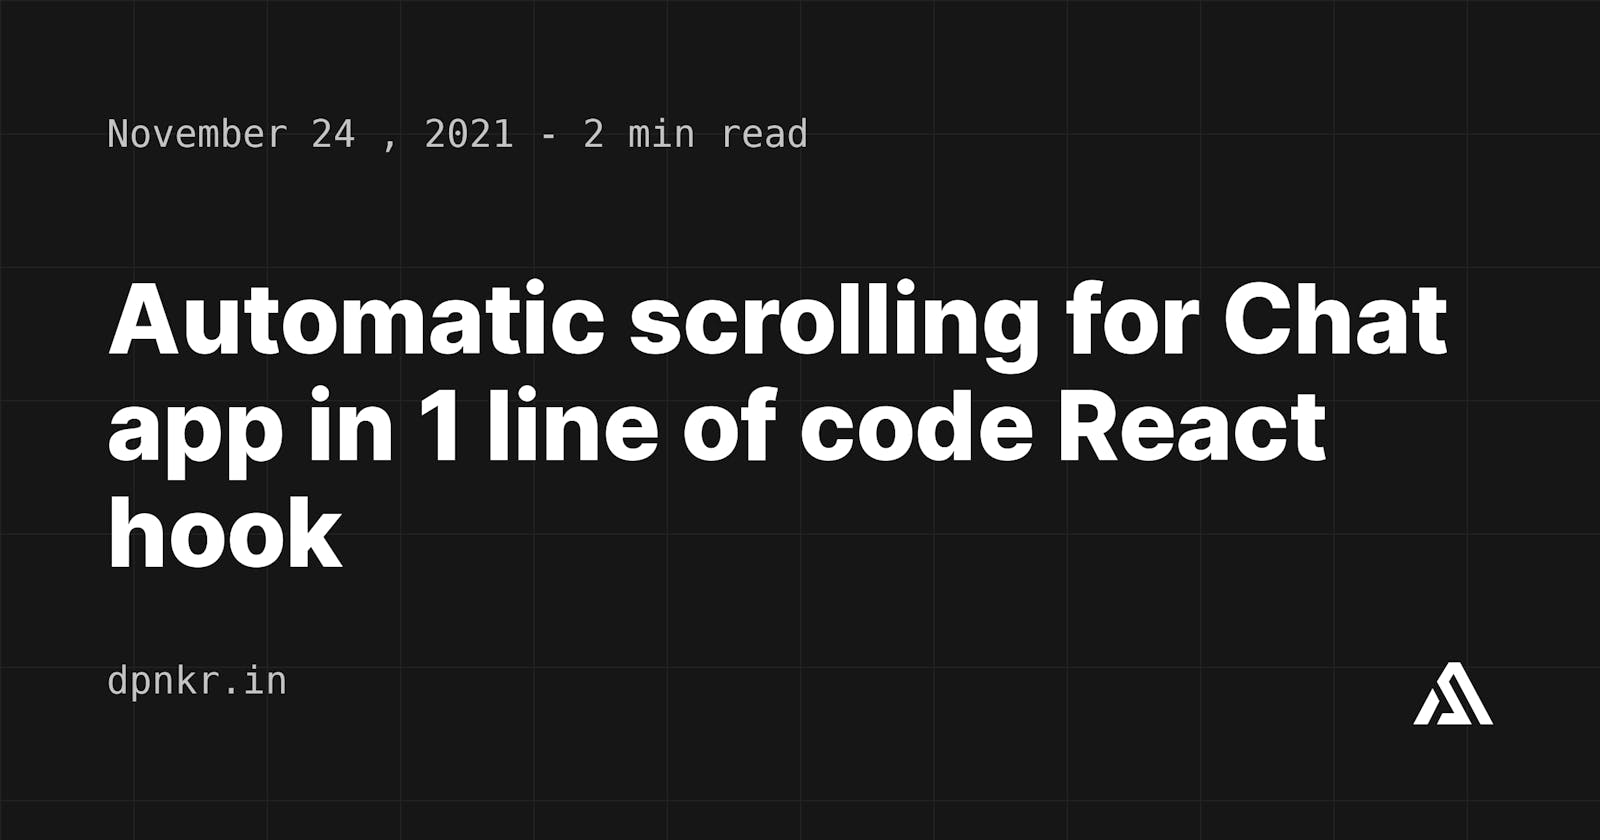 Automatic scrolling for Chat app in 1 line of code + React hook